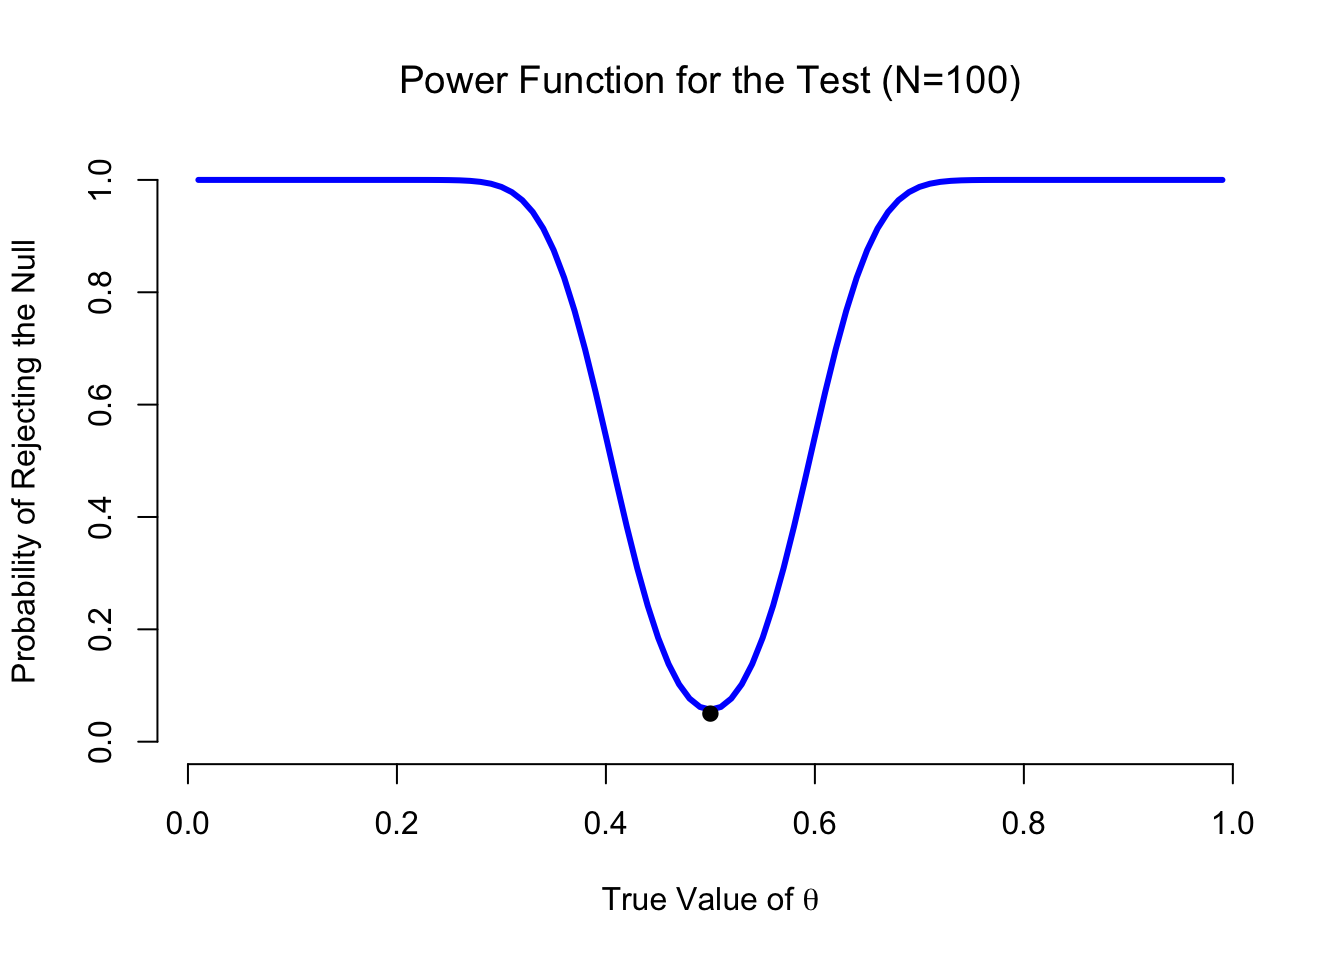 The probability that we will reject the null hypothesis, plotted as a function of the true value of $\theta$. Obviously, the test is more powerful (greater chance of correct rejection) if the true value of $\theta$ is very different from the value that the null hypothesis specifies (i.e., $\theta=.5$). Notice that when $\theta$ actually is equal to .5 (plotted as a black dot), the null hypothesis is in fact true: rejecting the null hypothesis in this instance would be a Type I error.